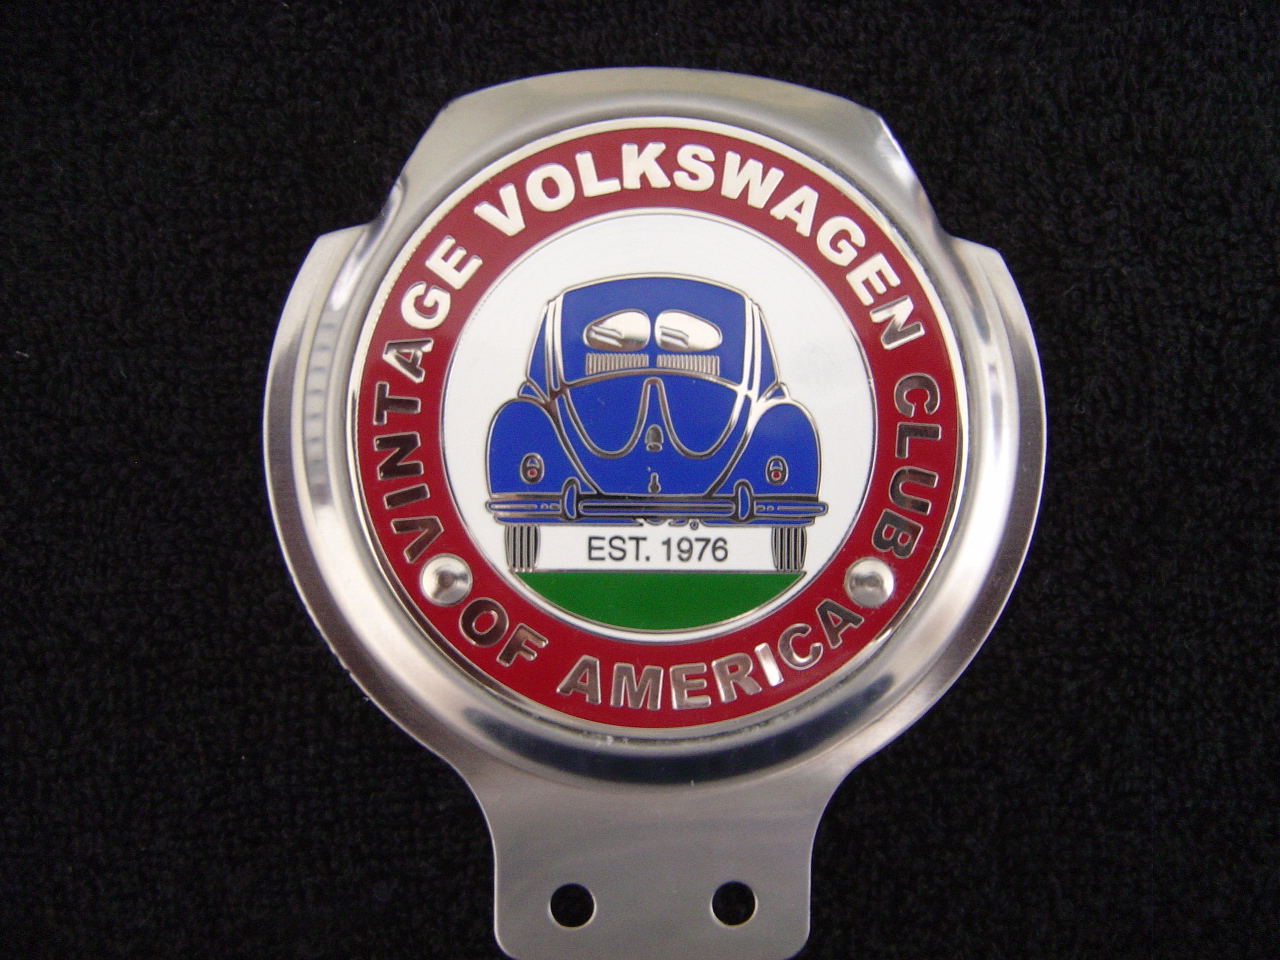  :: Gallery - new version of the vintage vw club of america  badge